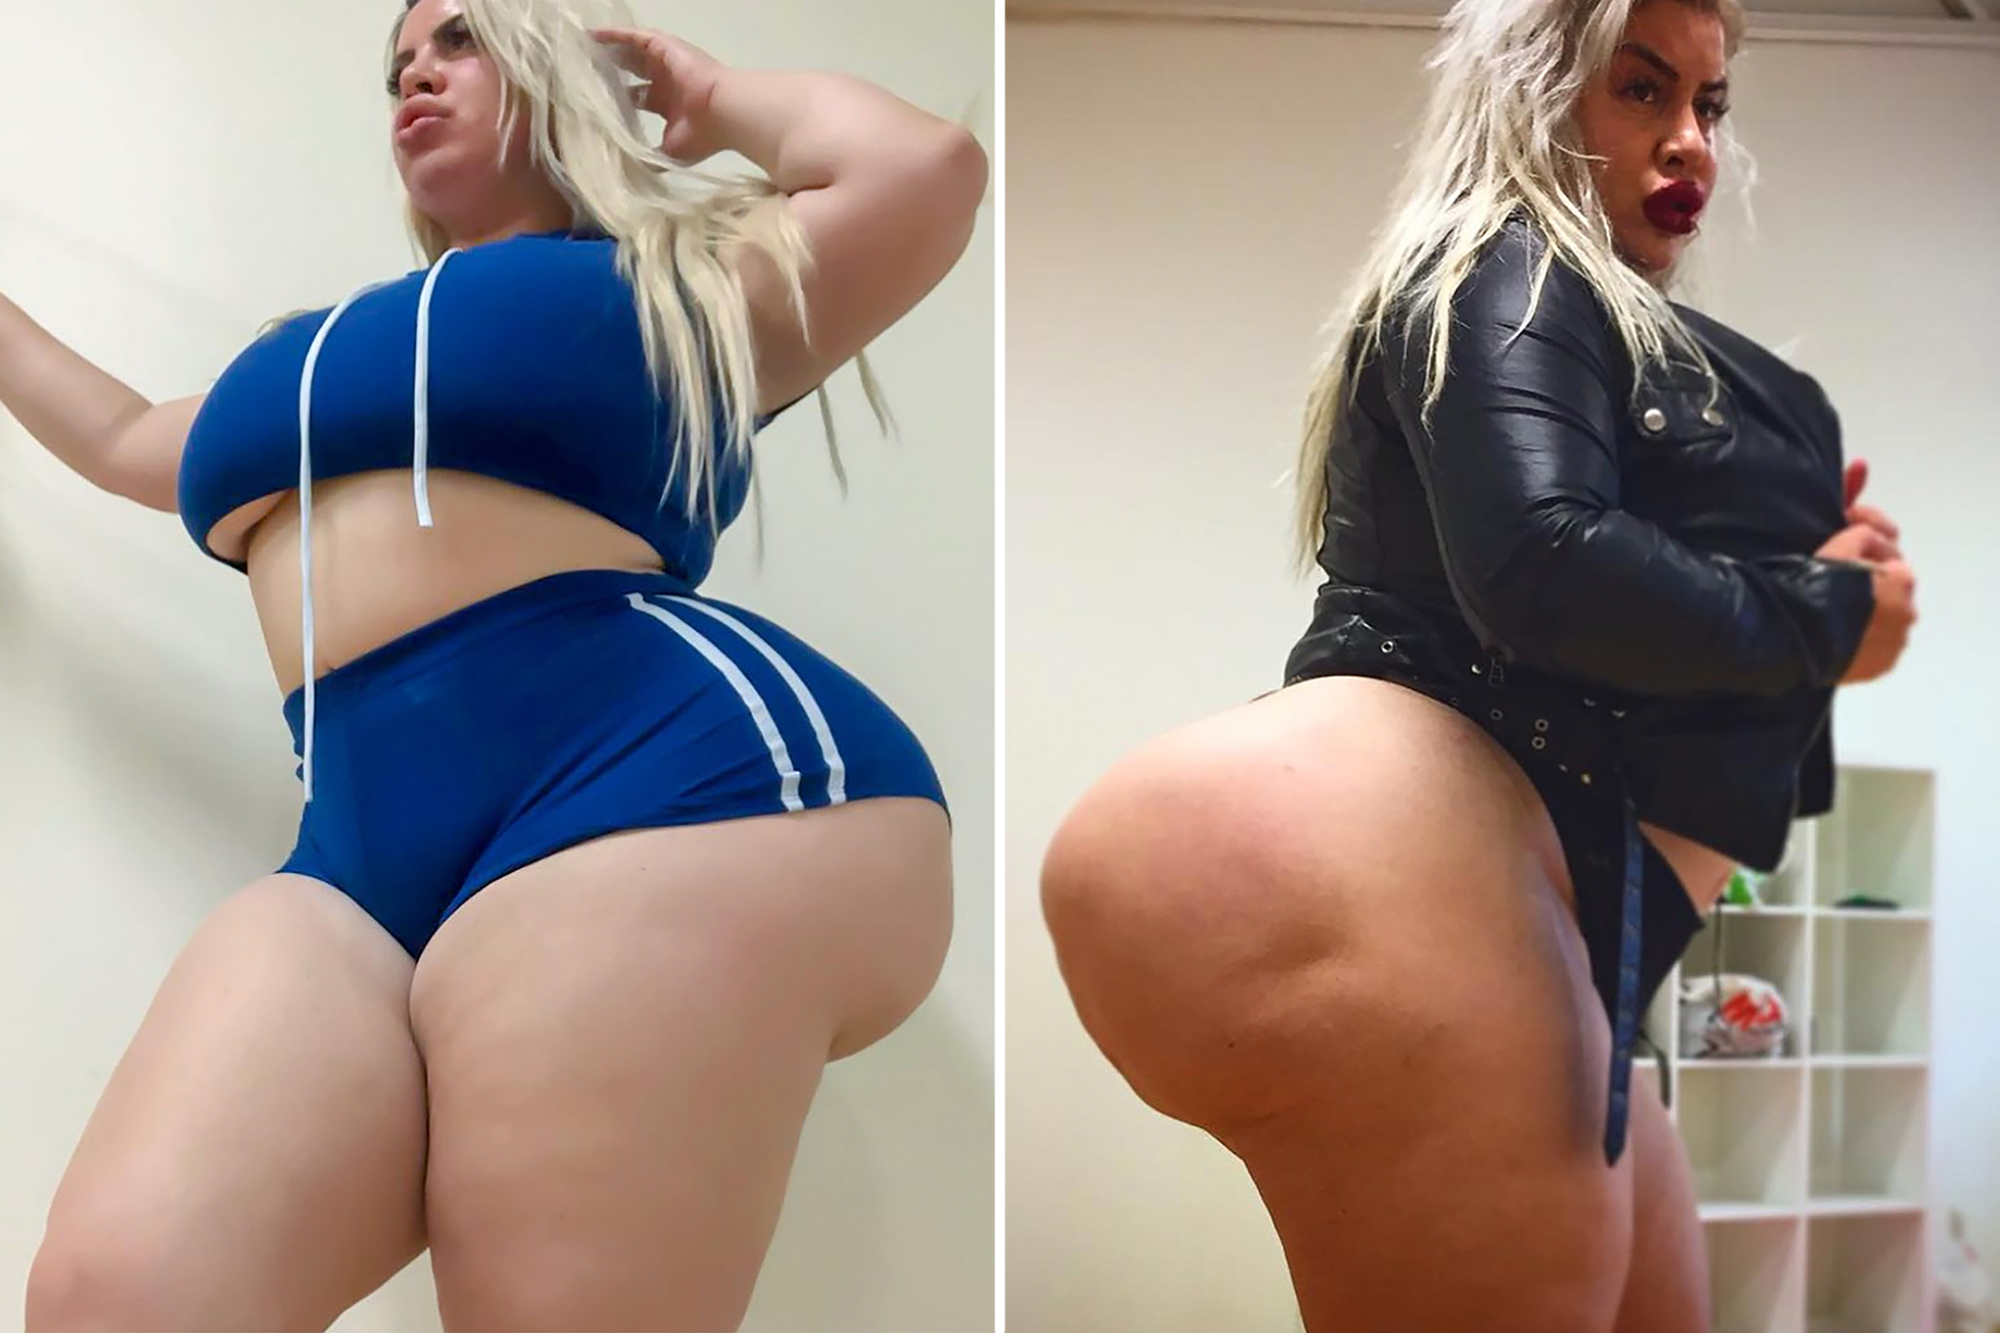 cindy wendling recommends latina bubble butt video pic